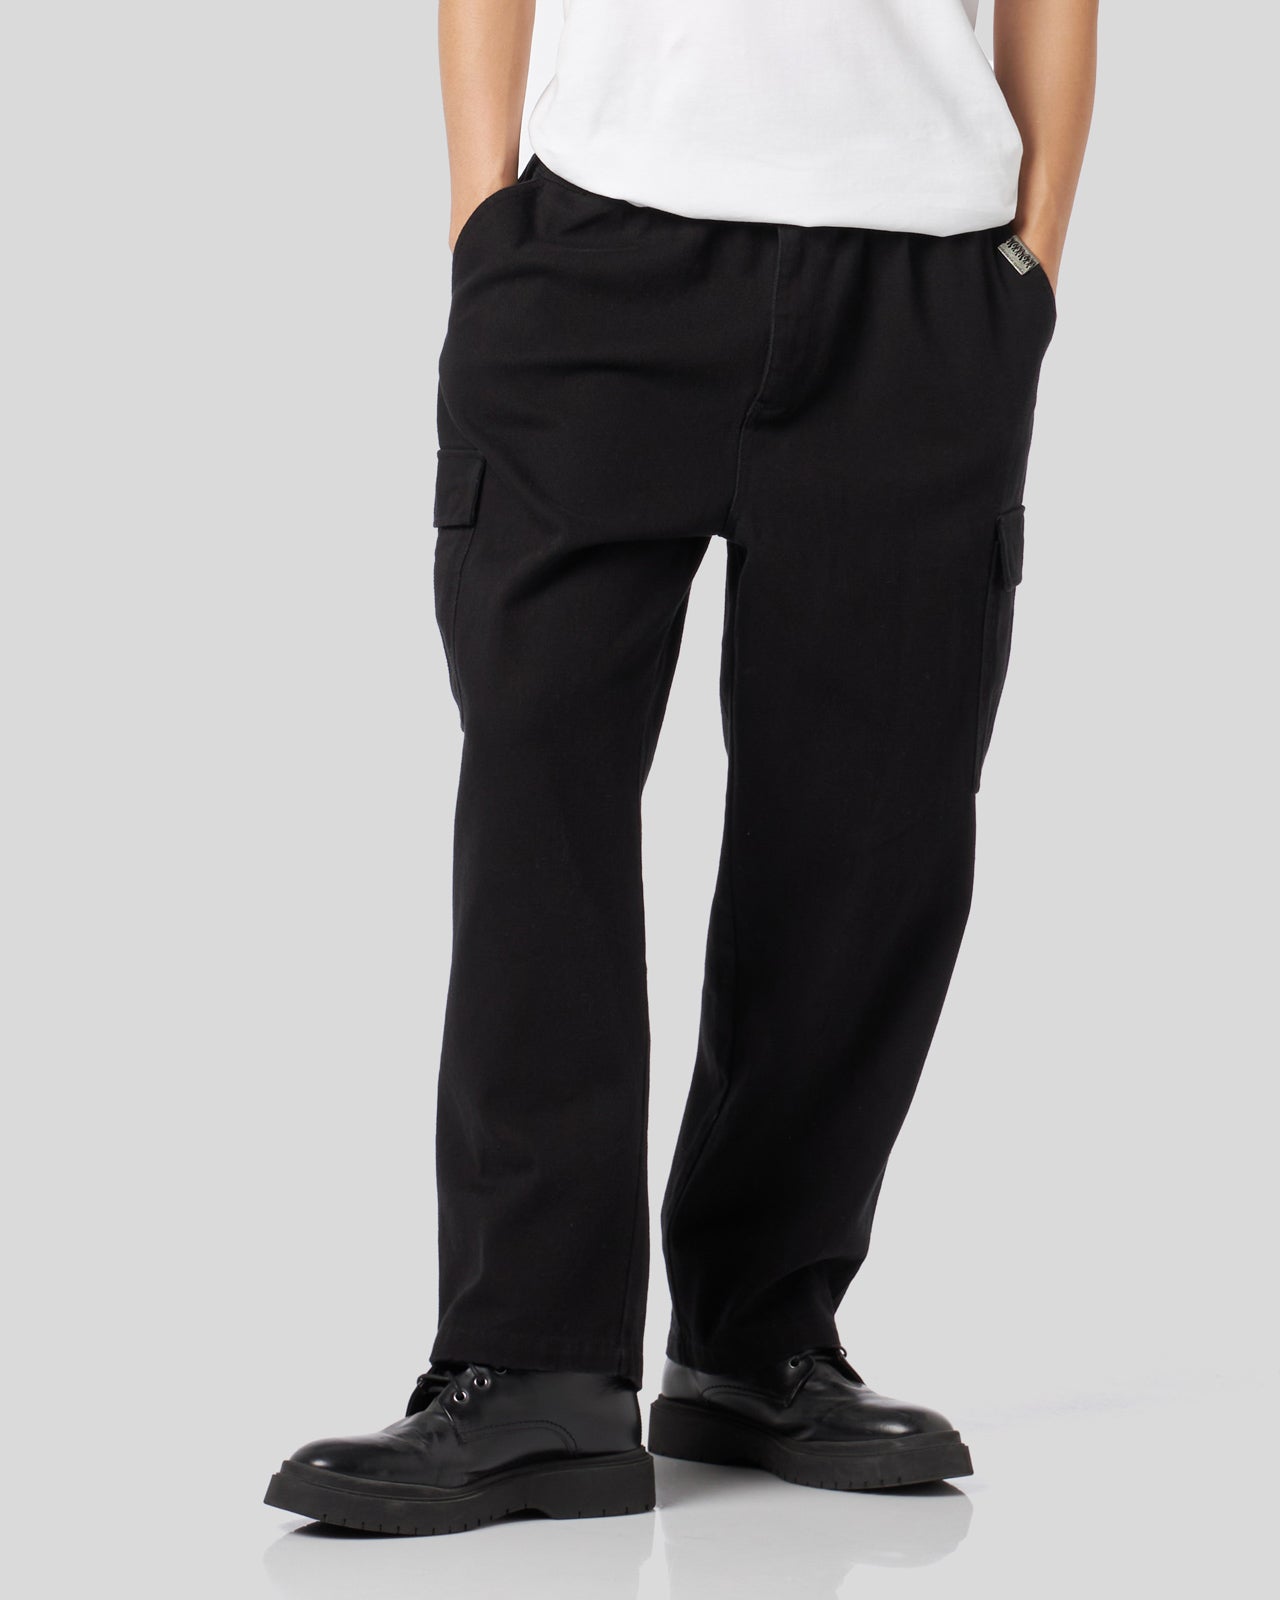 BLACK CARGO PANTS WITH FLAMES LOGO PATCH AND PRINTED LOGO